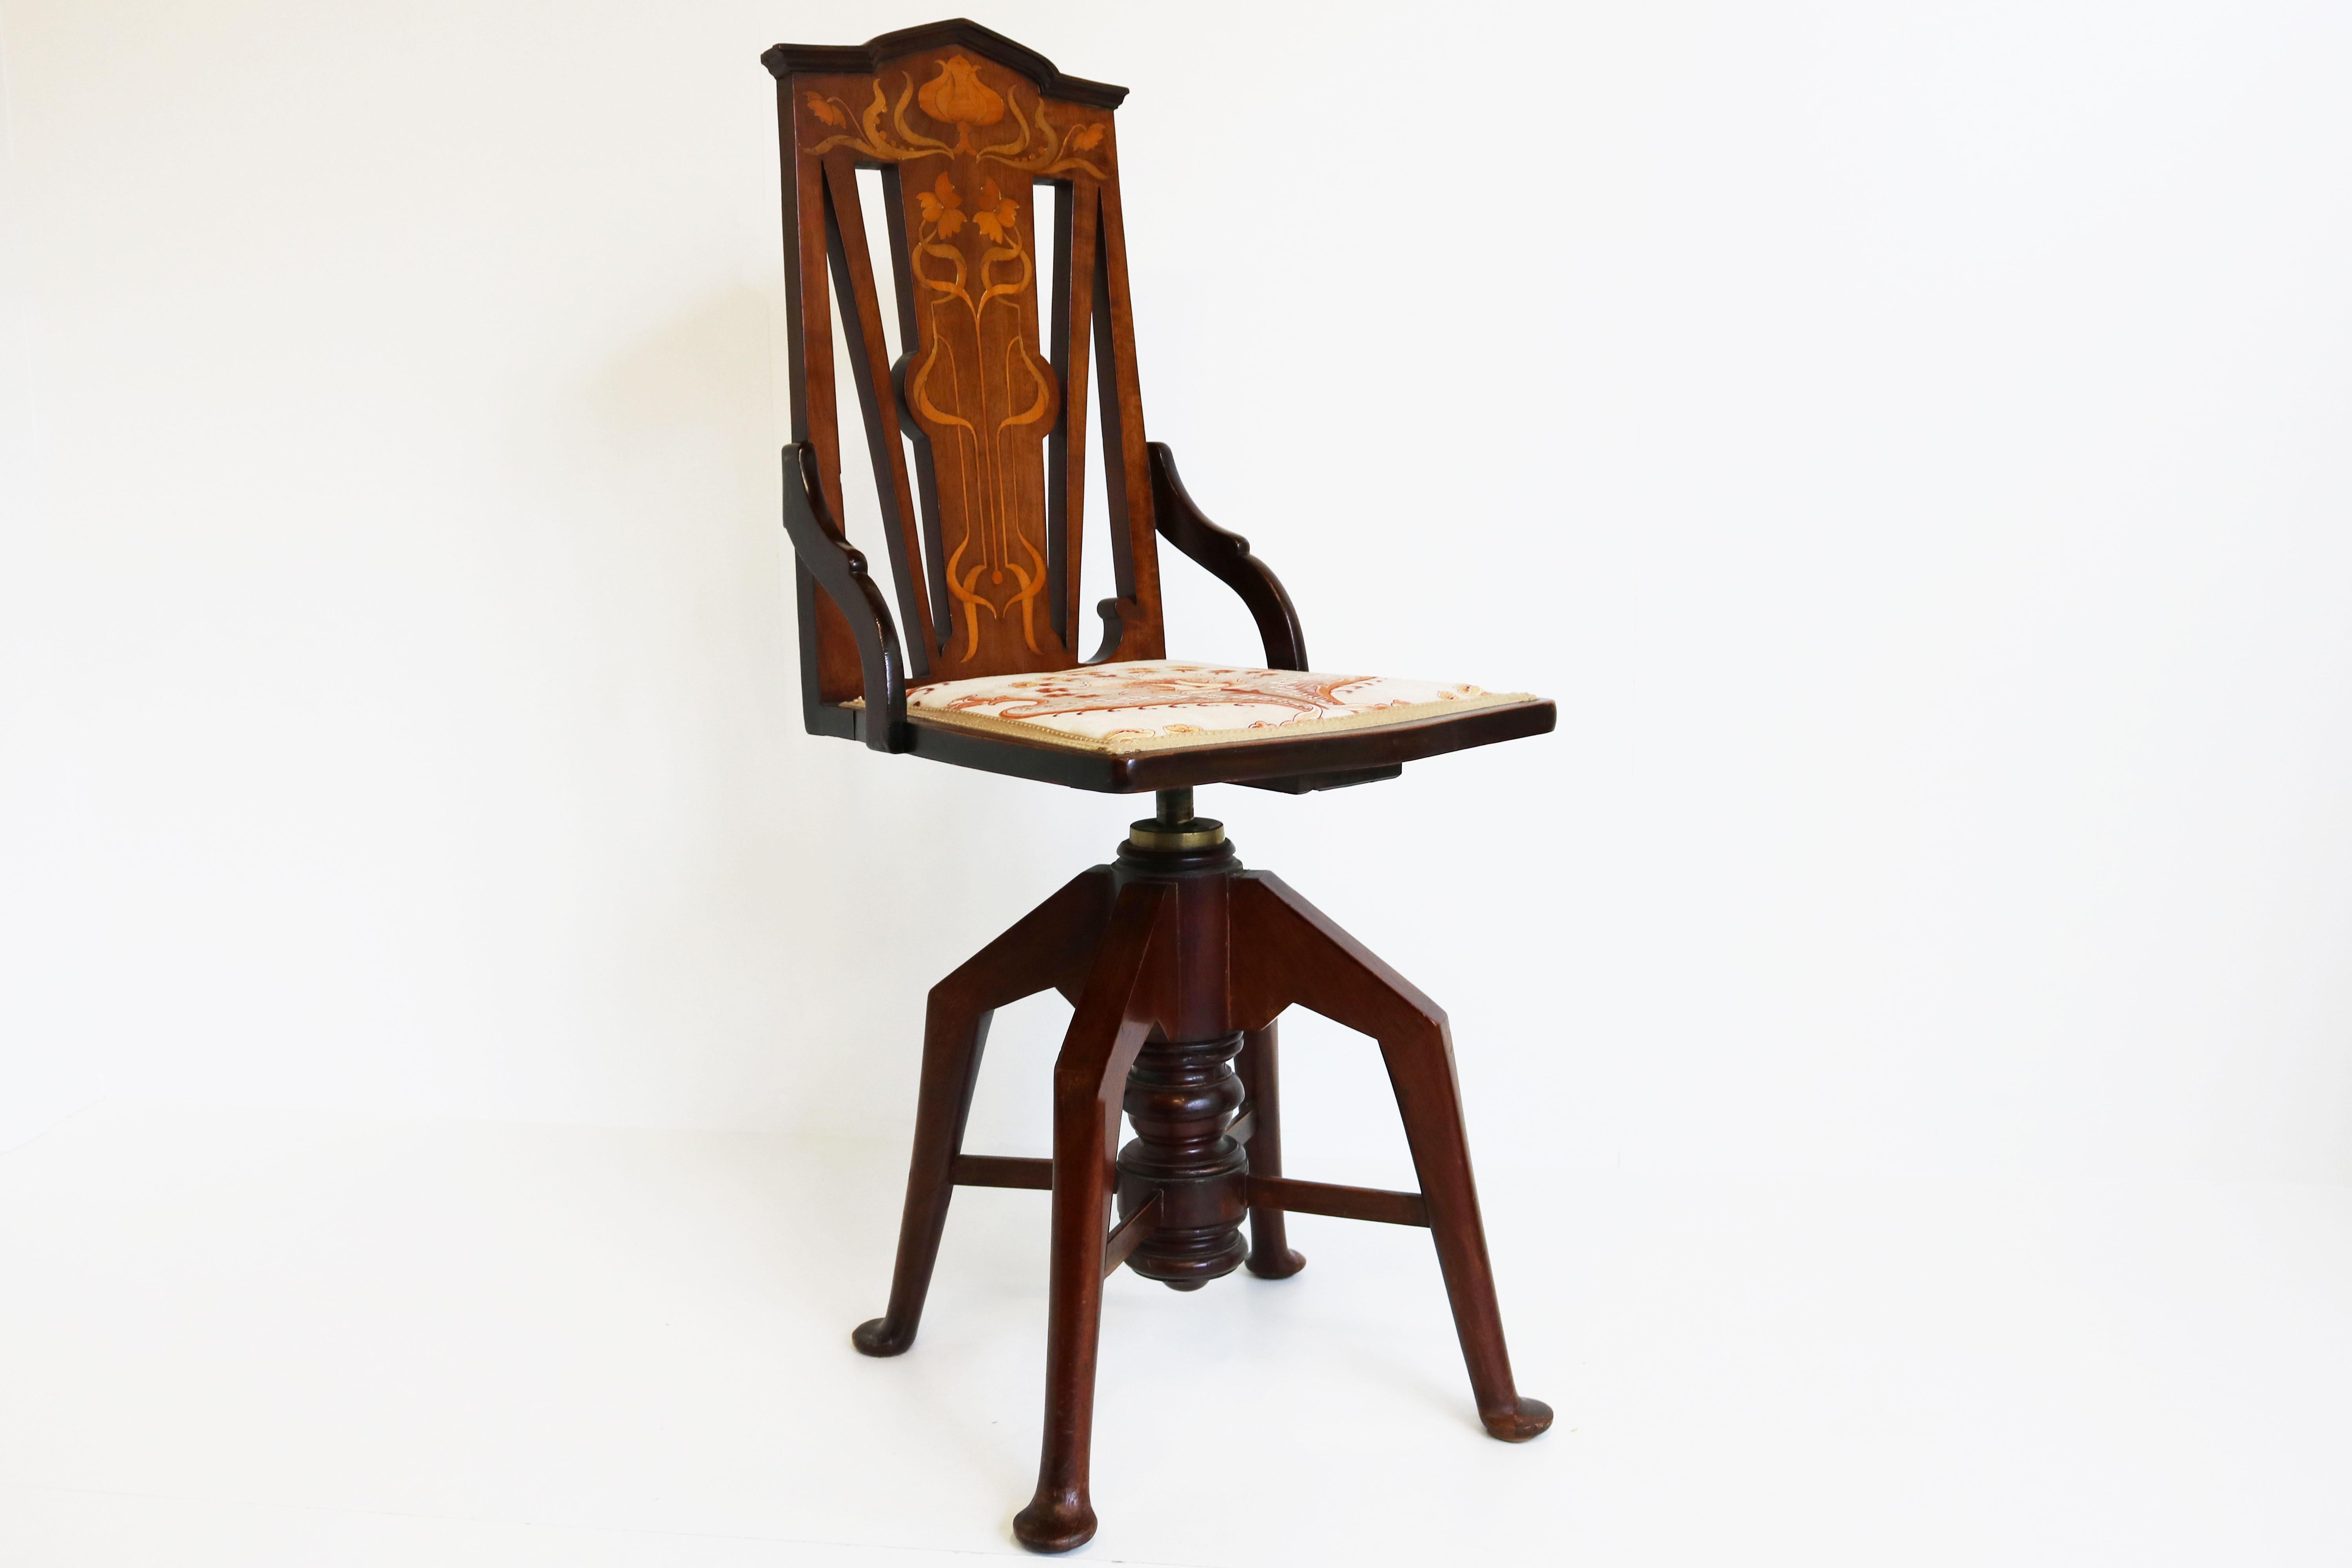 Wonderful antique Art Nouveau adjustable swivel music chair, circa 1900s in solid mahogany. The chairs back inlaid with classical Art Nouveau flowers and foliage in satinwood, boxwood and various stained woods by hand. High quality piece of